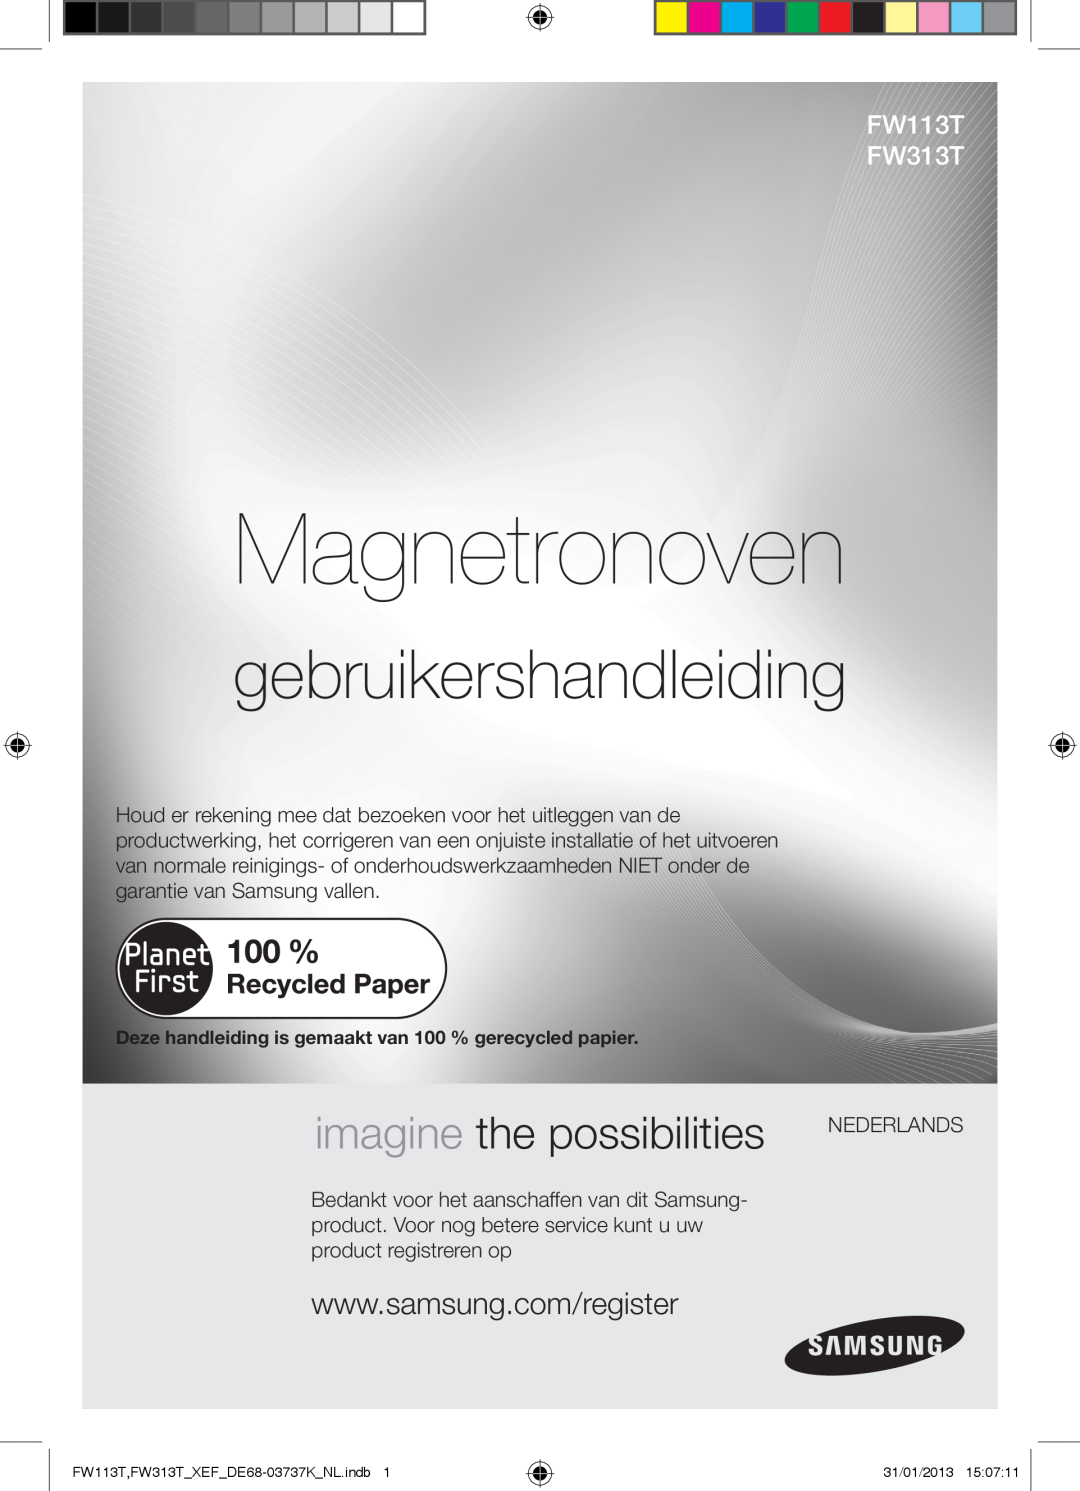 Samsung FW113T002/XEF manual Magnetronoven, gebruikershandleiding, imagine the possibilities, FW113T FW313T 